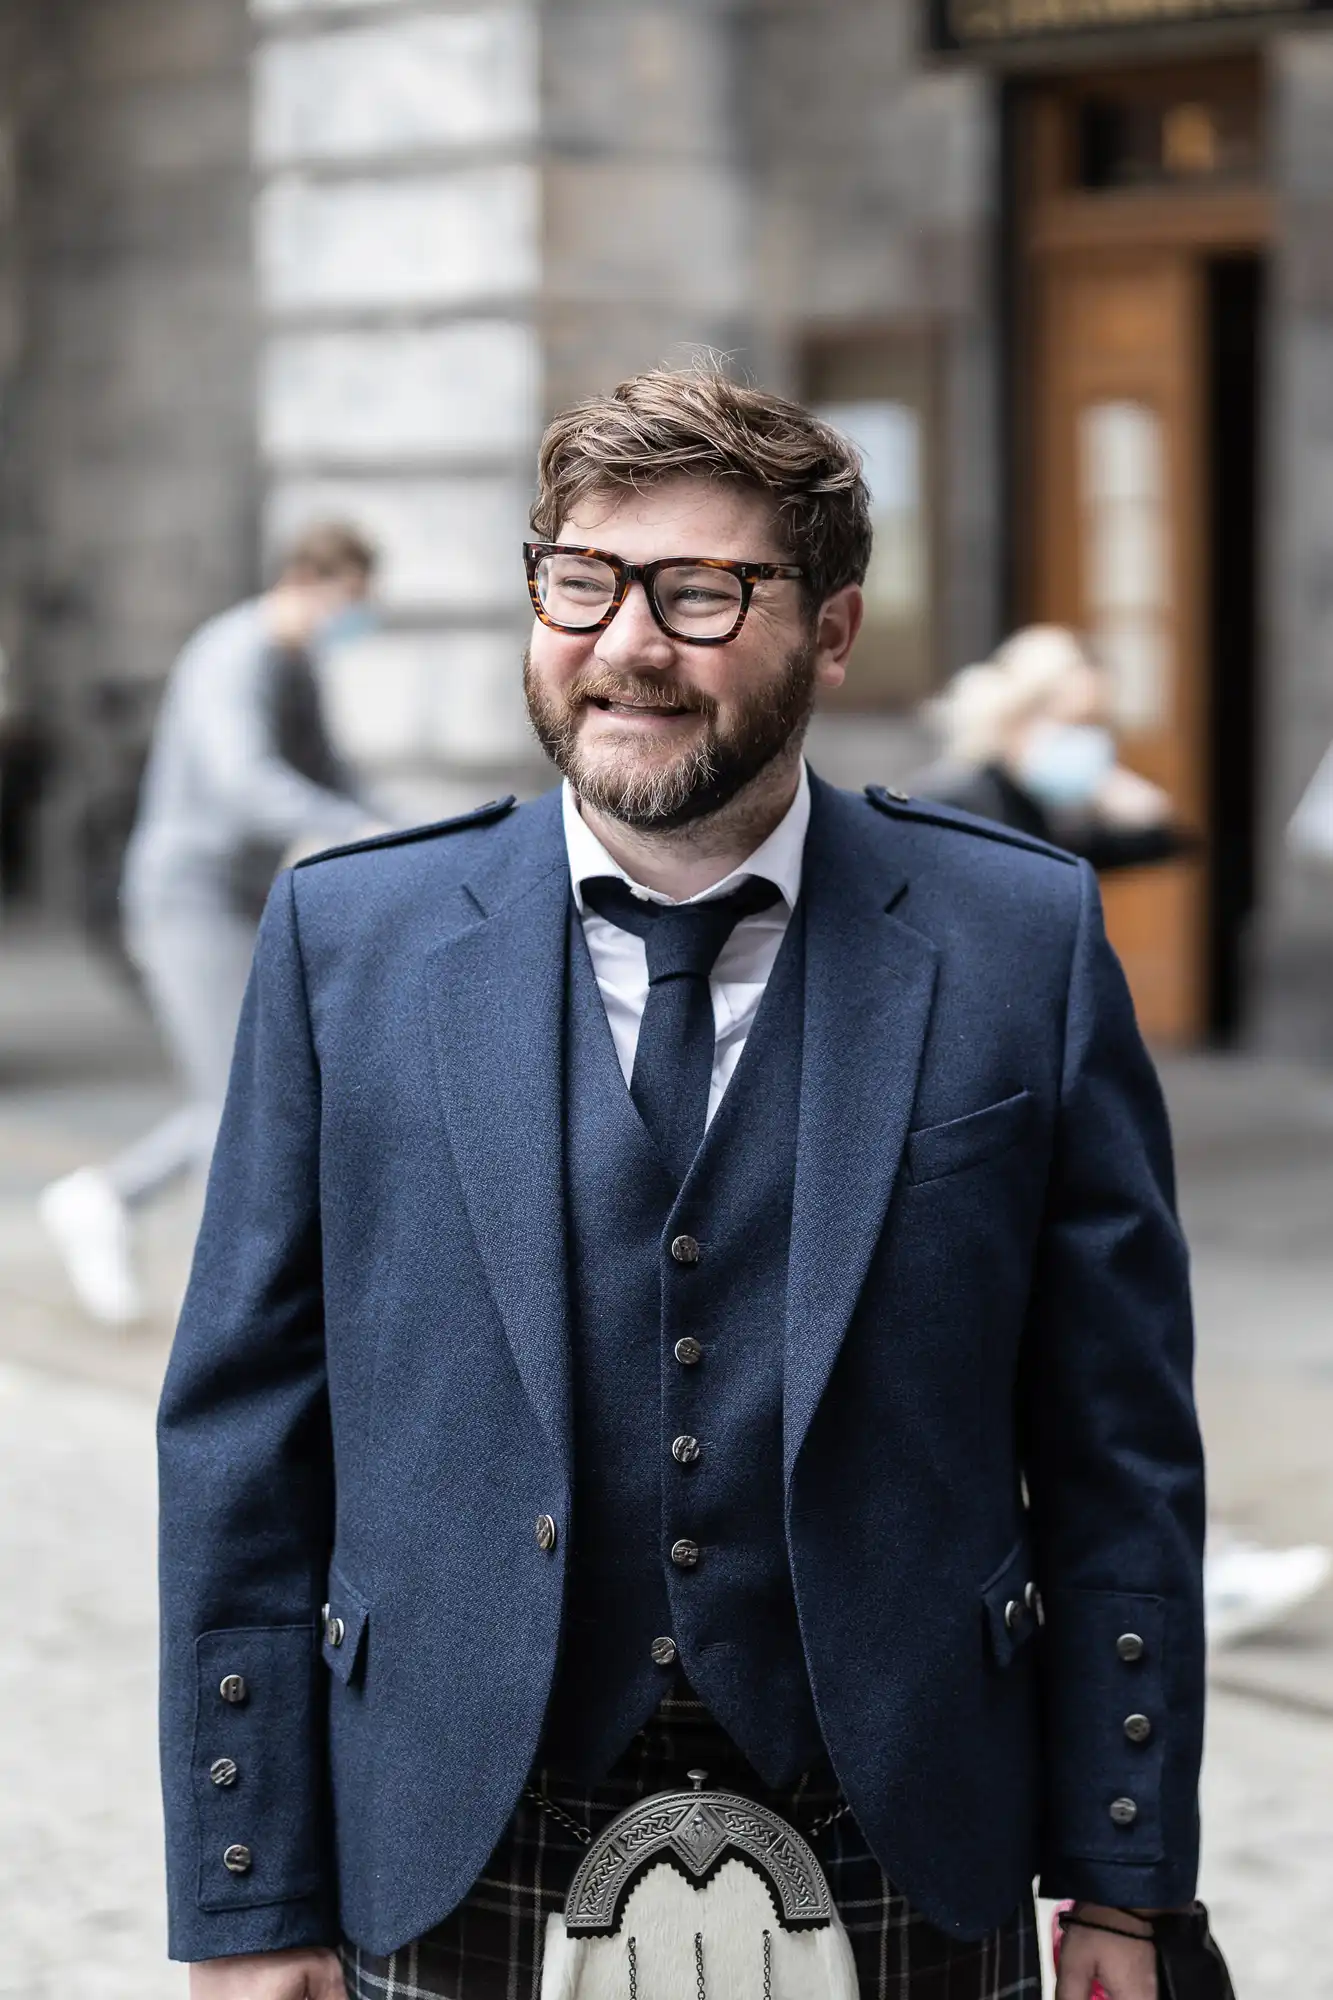 A man in a blue blazer and kilt smiling on a city street.